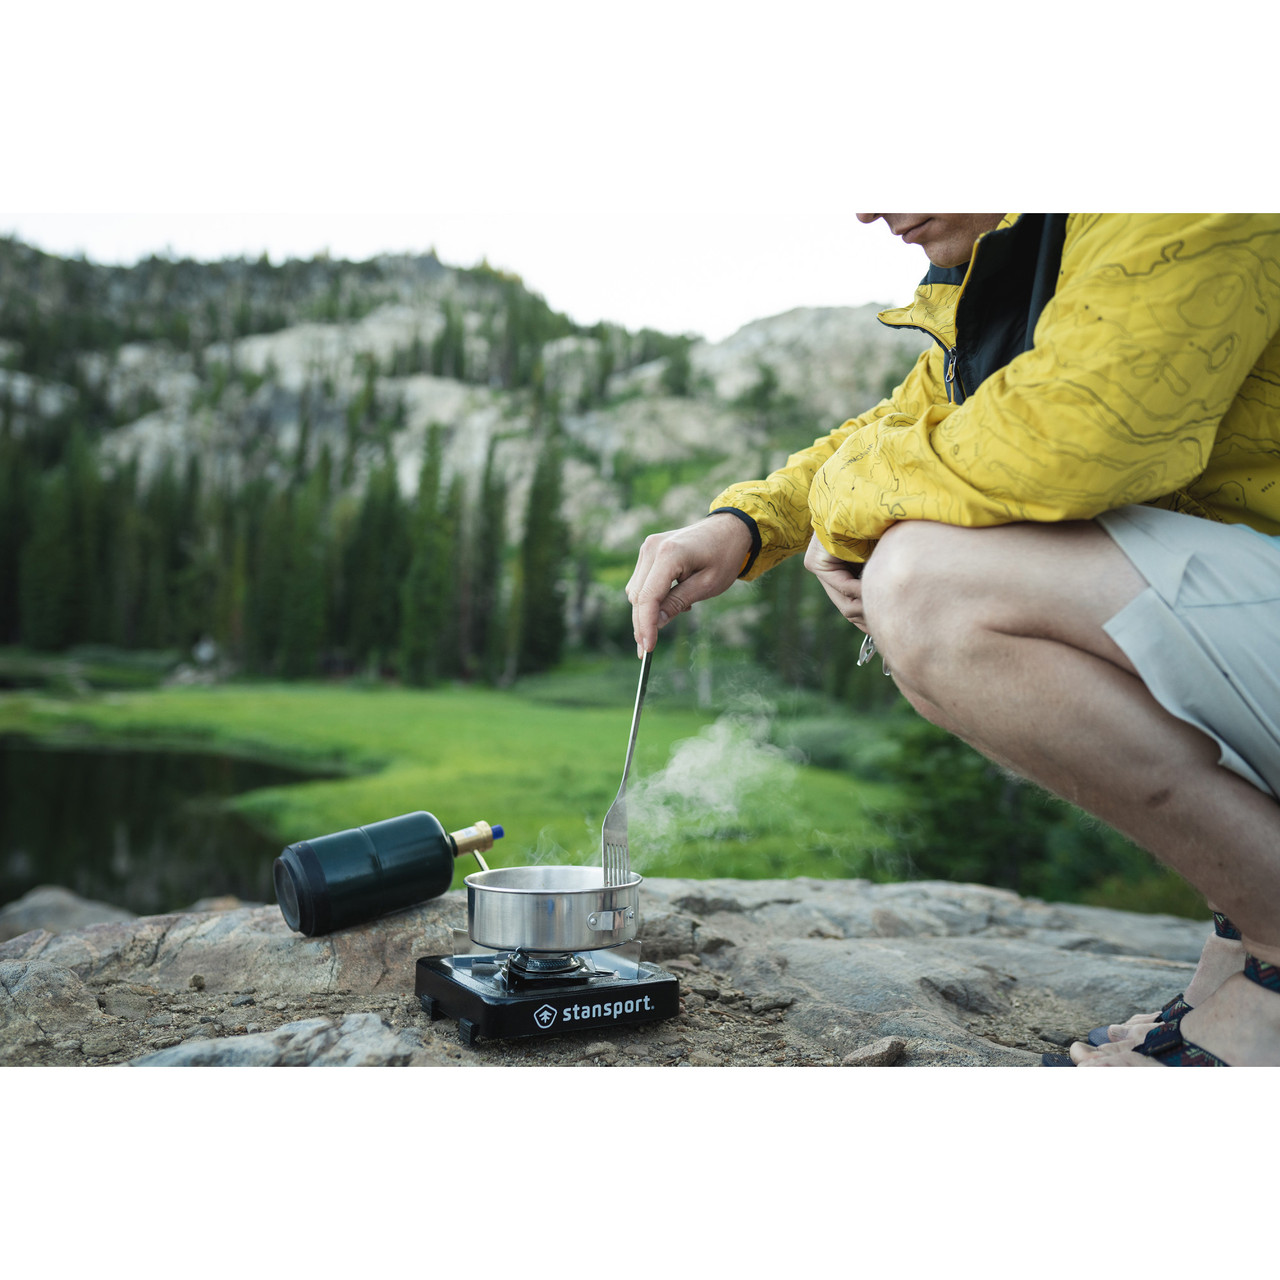 Outdoor Propane Single Burner Stove With Threaded Legs – R & B Import